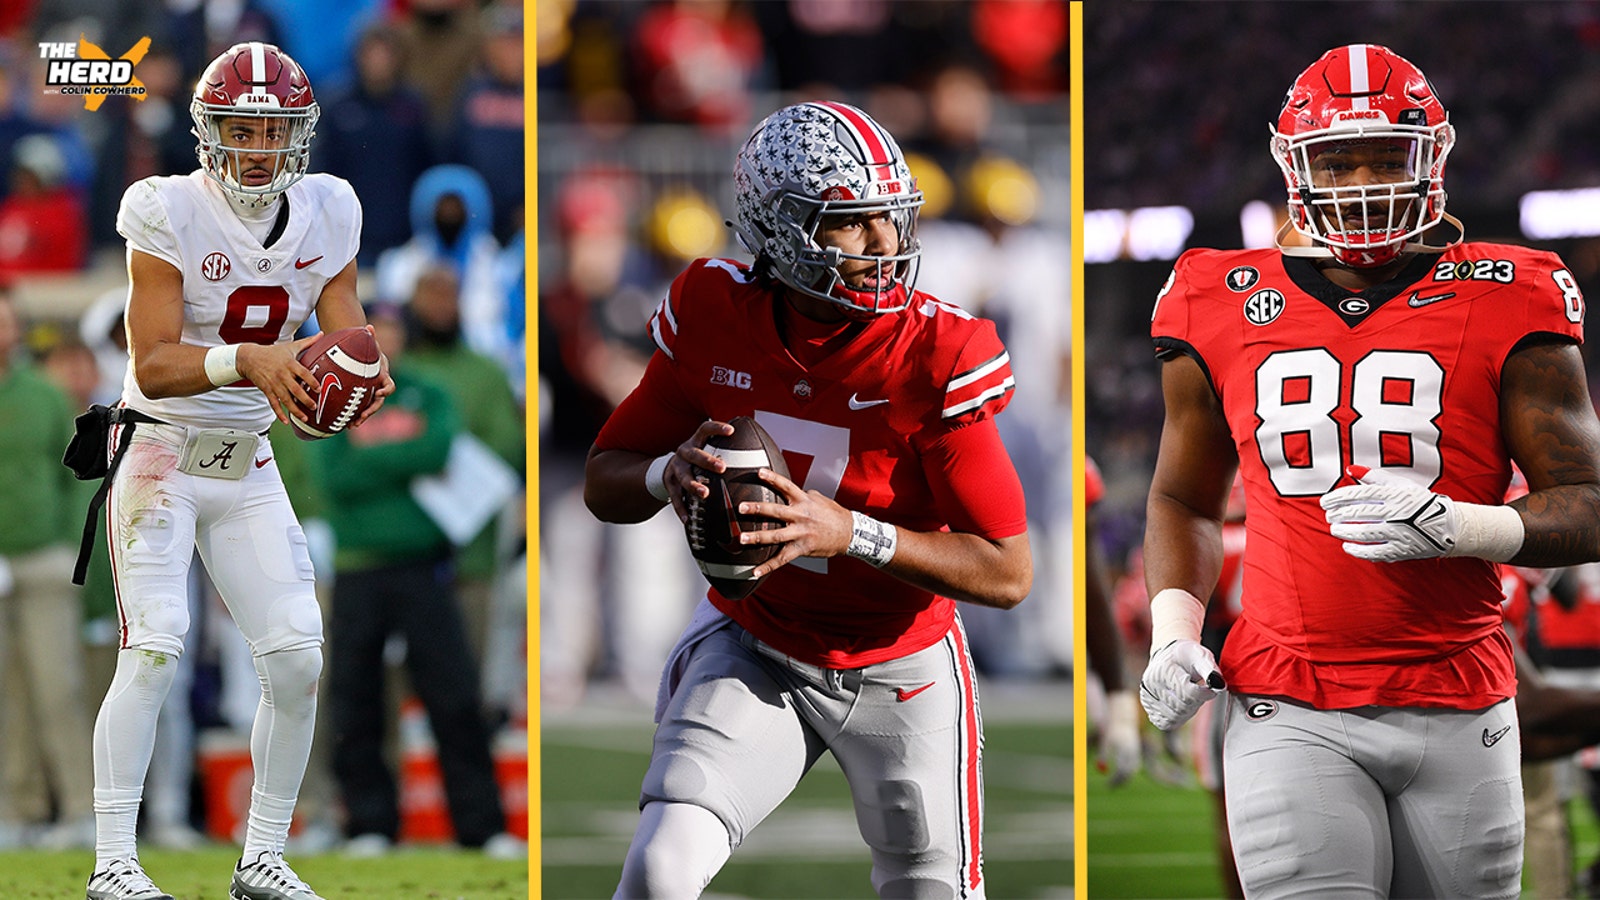 Beryl TV play-64fe5d5ec0000ae--h_1680633961240 NFL mock draft: 2 trades up for QBs in top 3 shake things up Sports 